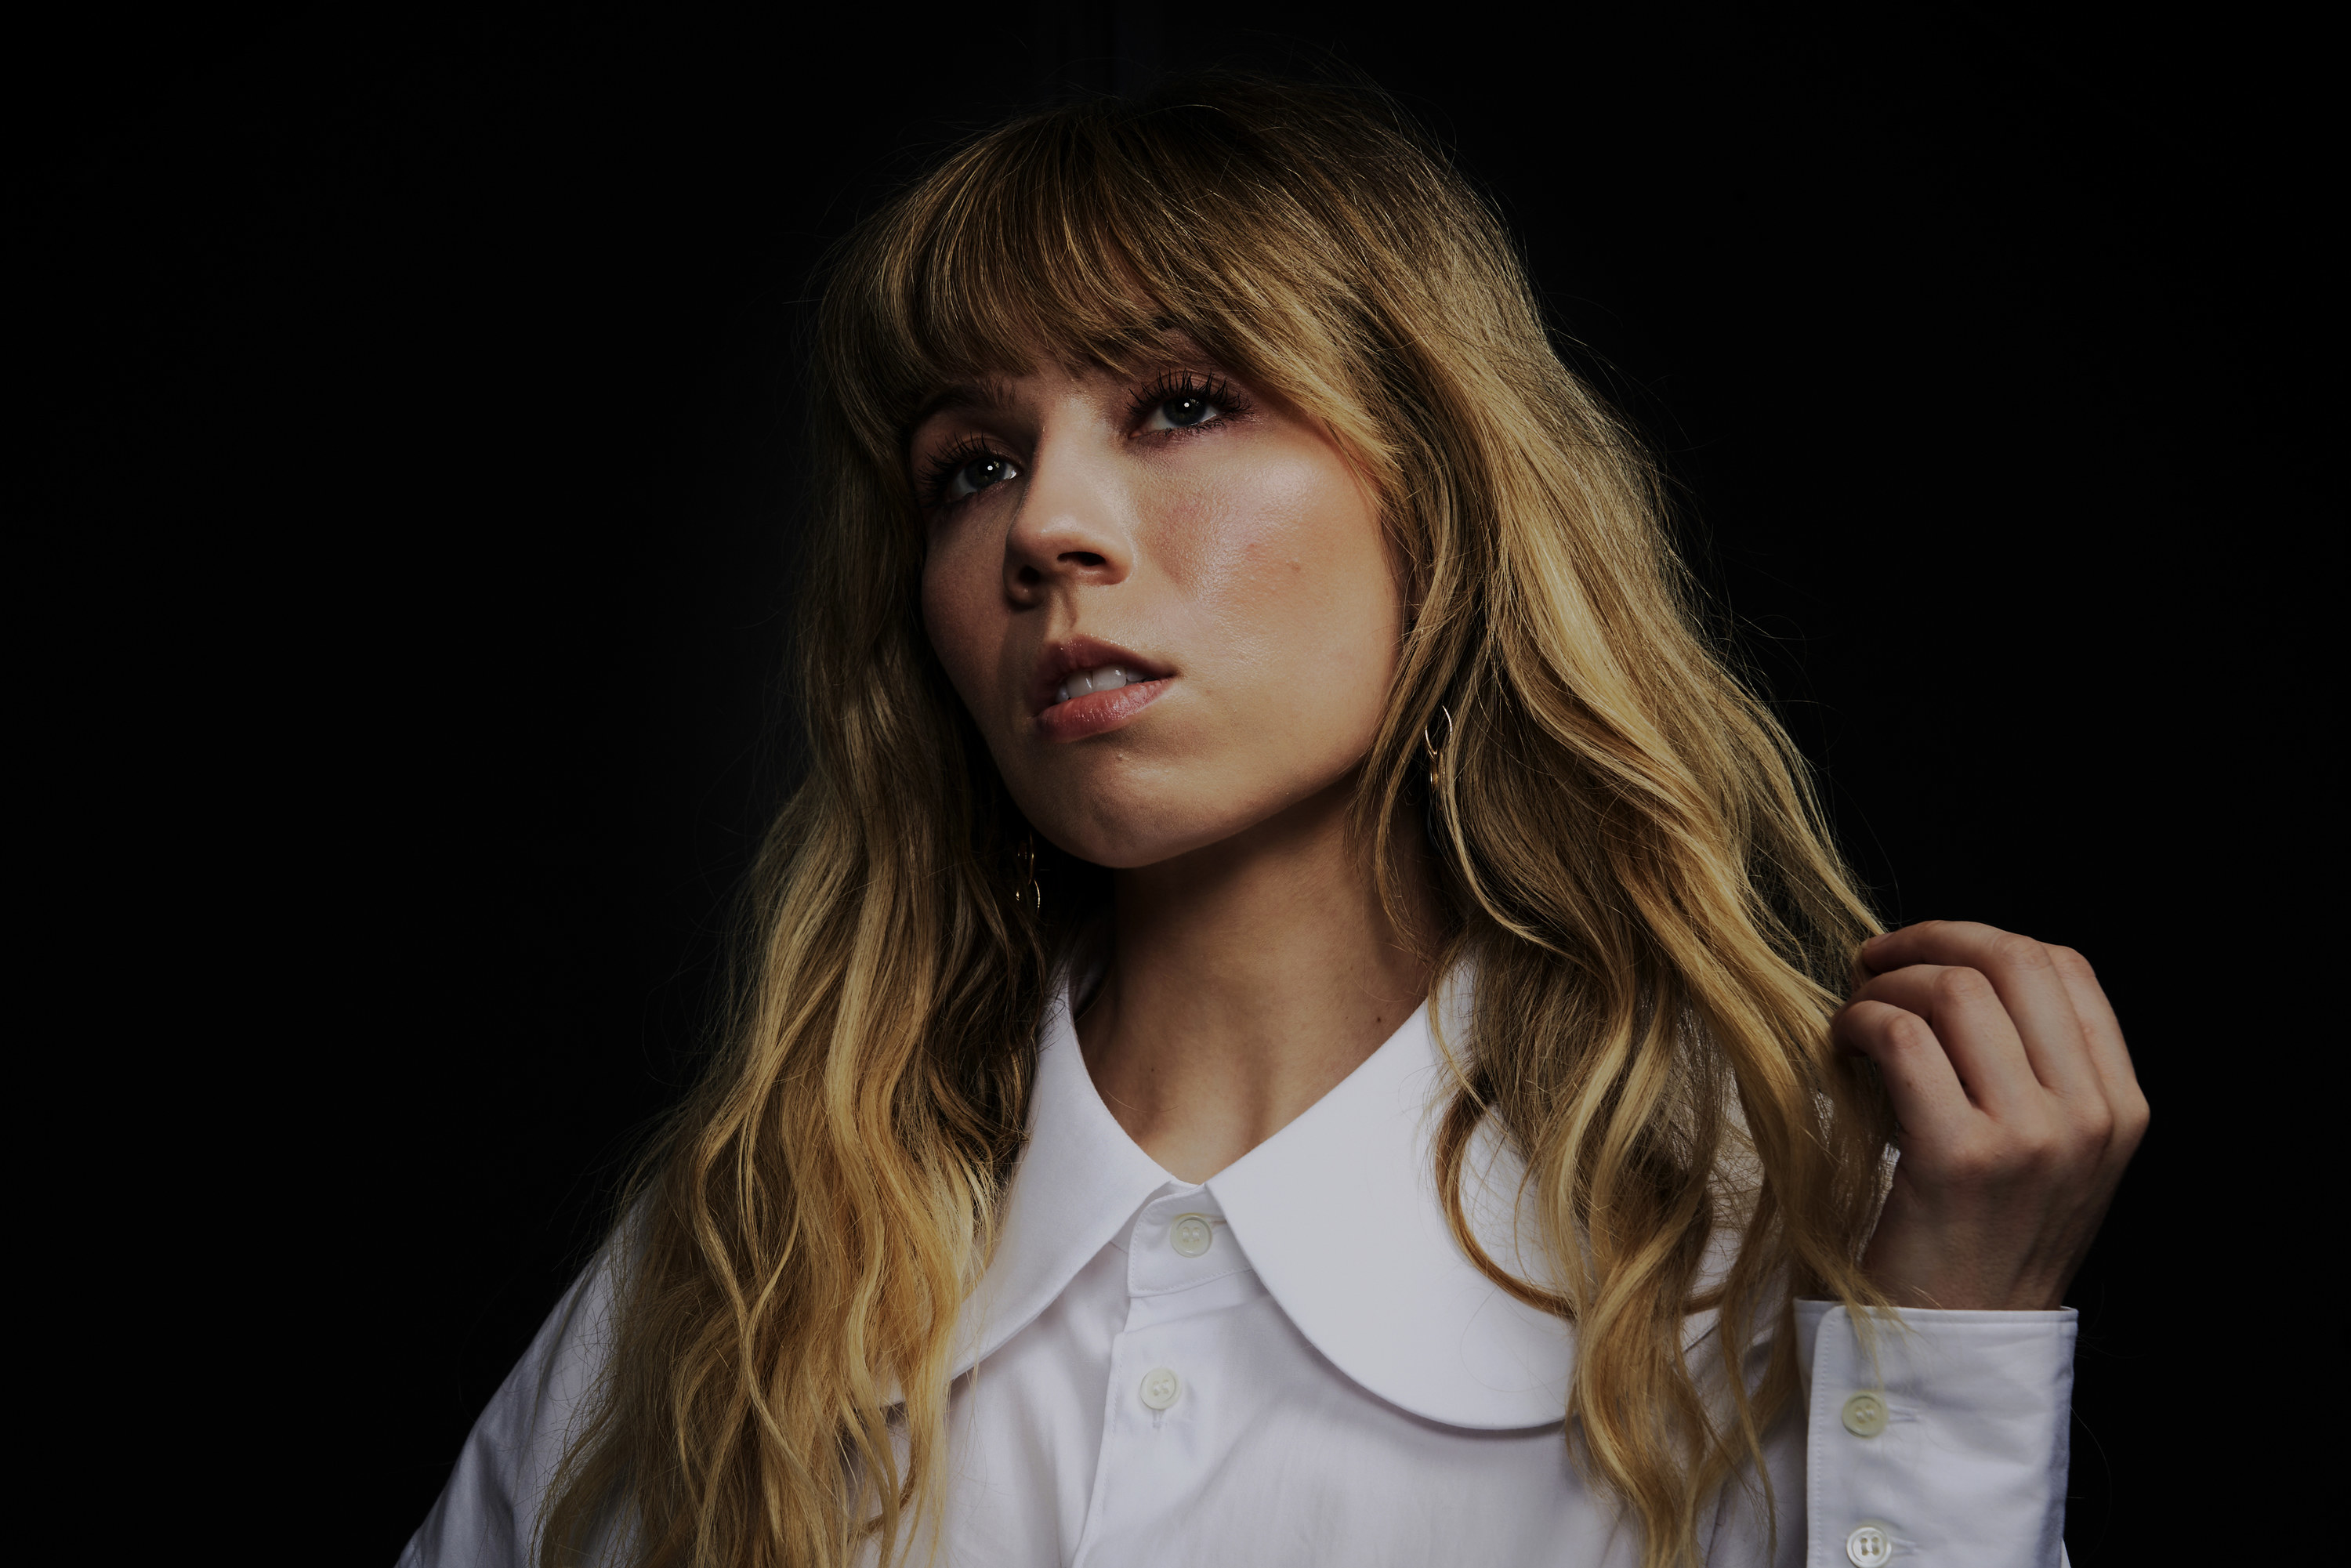 Jennette McCurdy, 30, a former Nickelodeon star, poses for a portrait at a studio in Downtown Los Angeles, California on August 1, 2022.